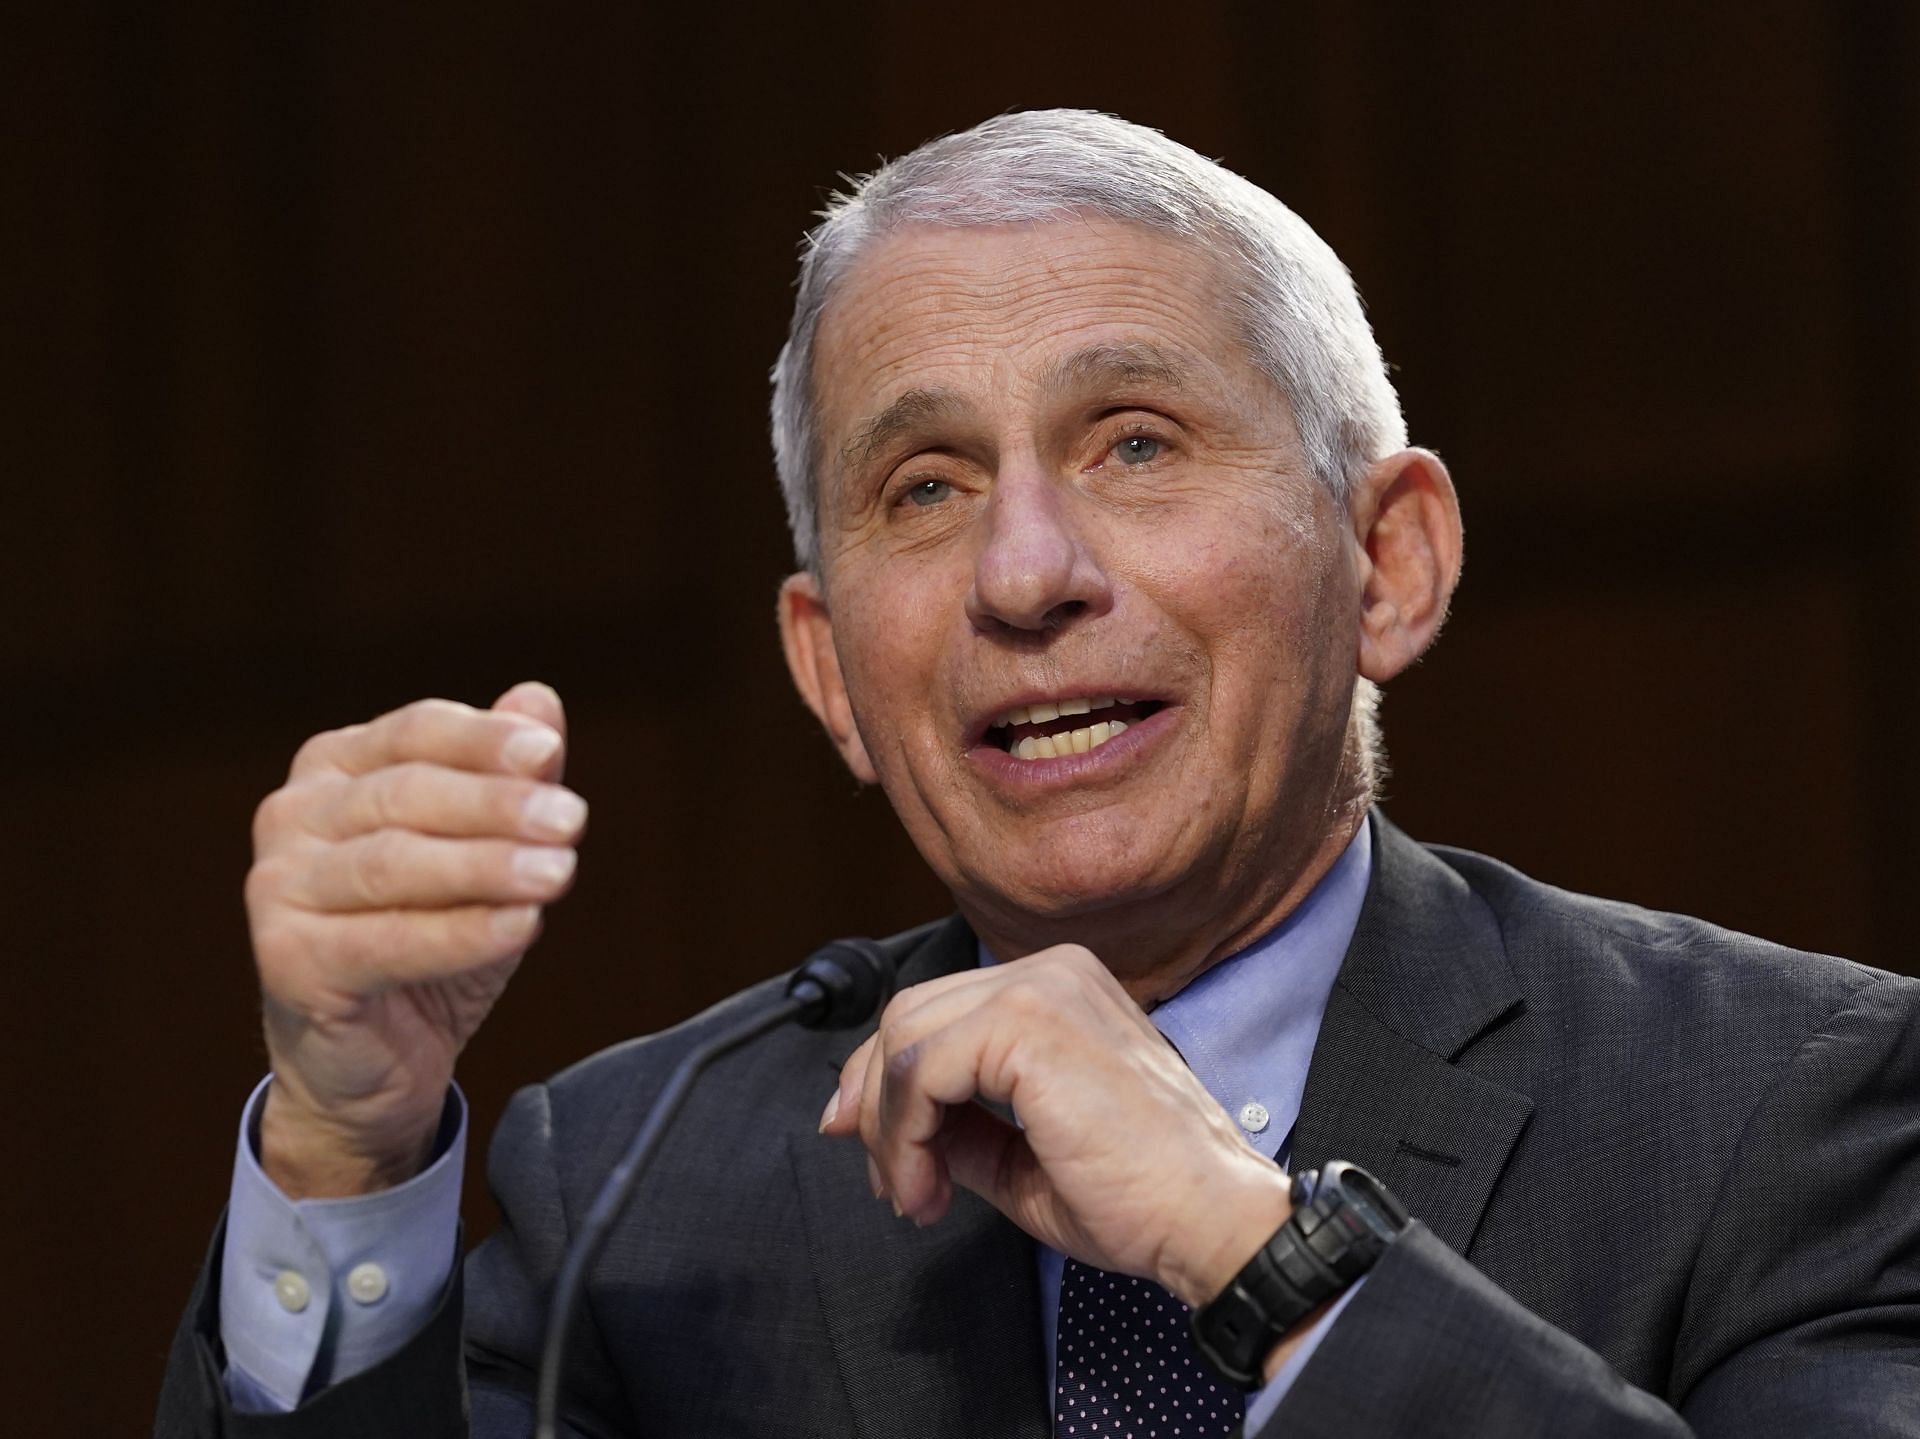 Dr. Anthony Fauci in a senate hearing (Image via Susan Walsh/Pool/Getty Images)